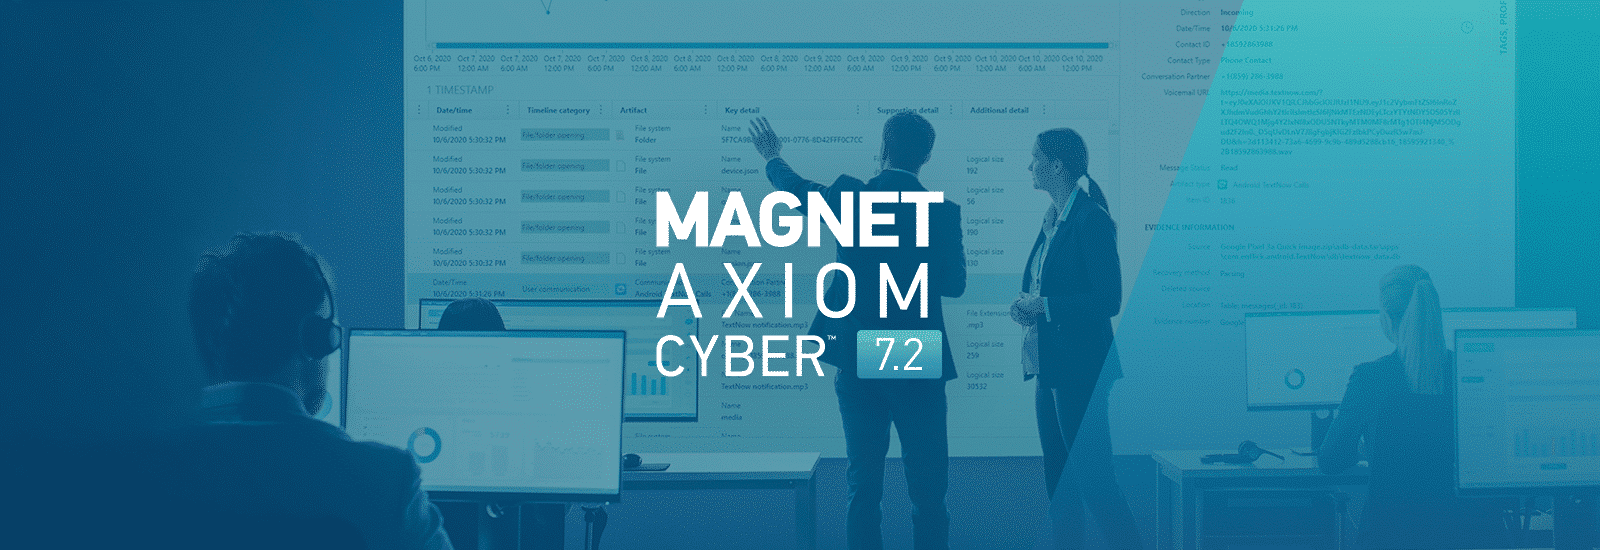 A decorative header for the Magnet AXIOM Cyber 7.2 release